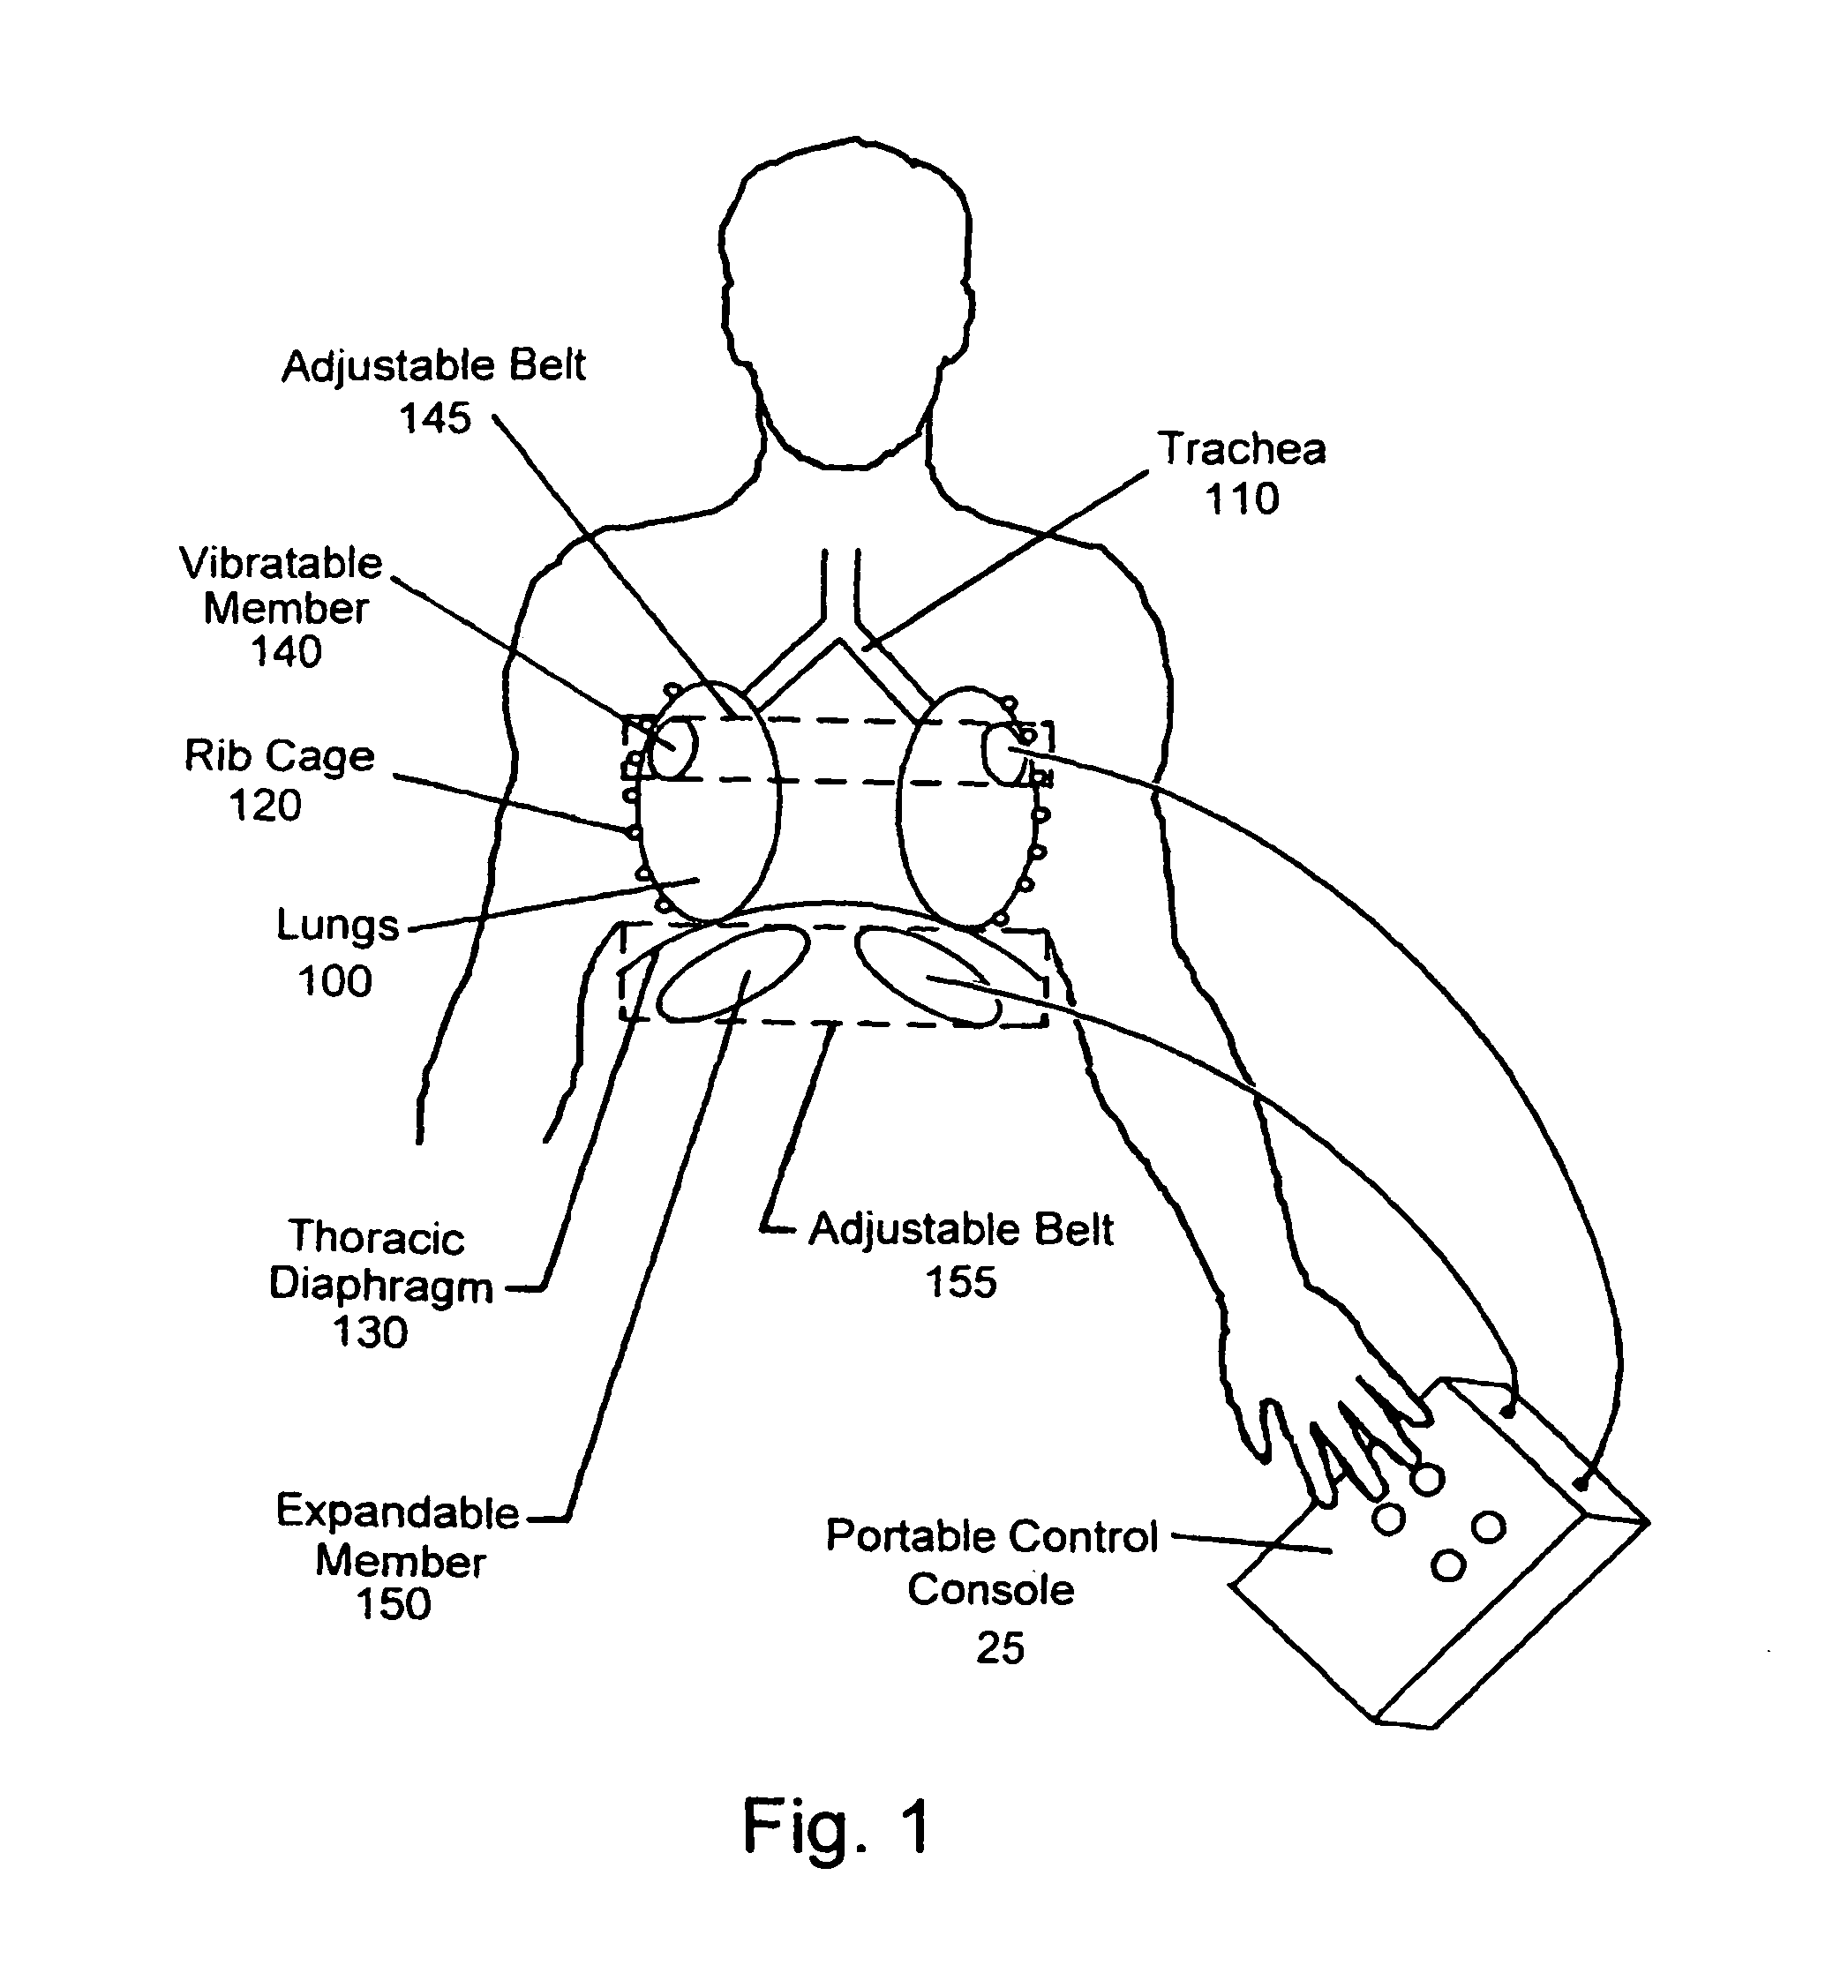 Apparatus for clearing mucus from the pulmonary system